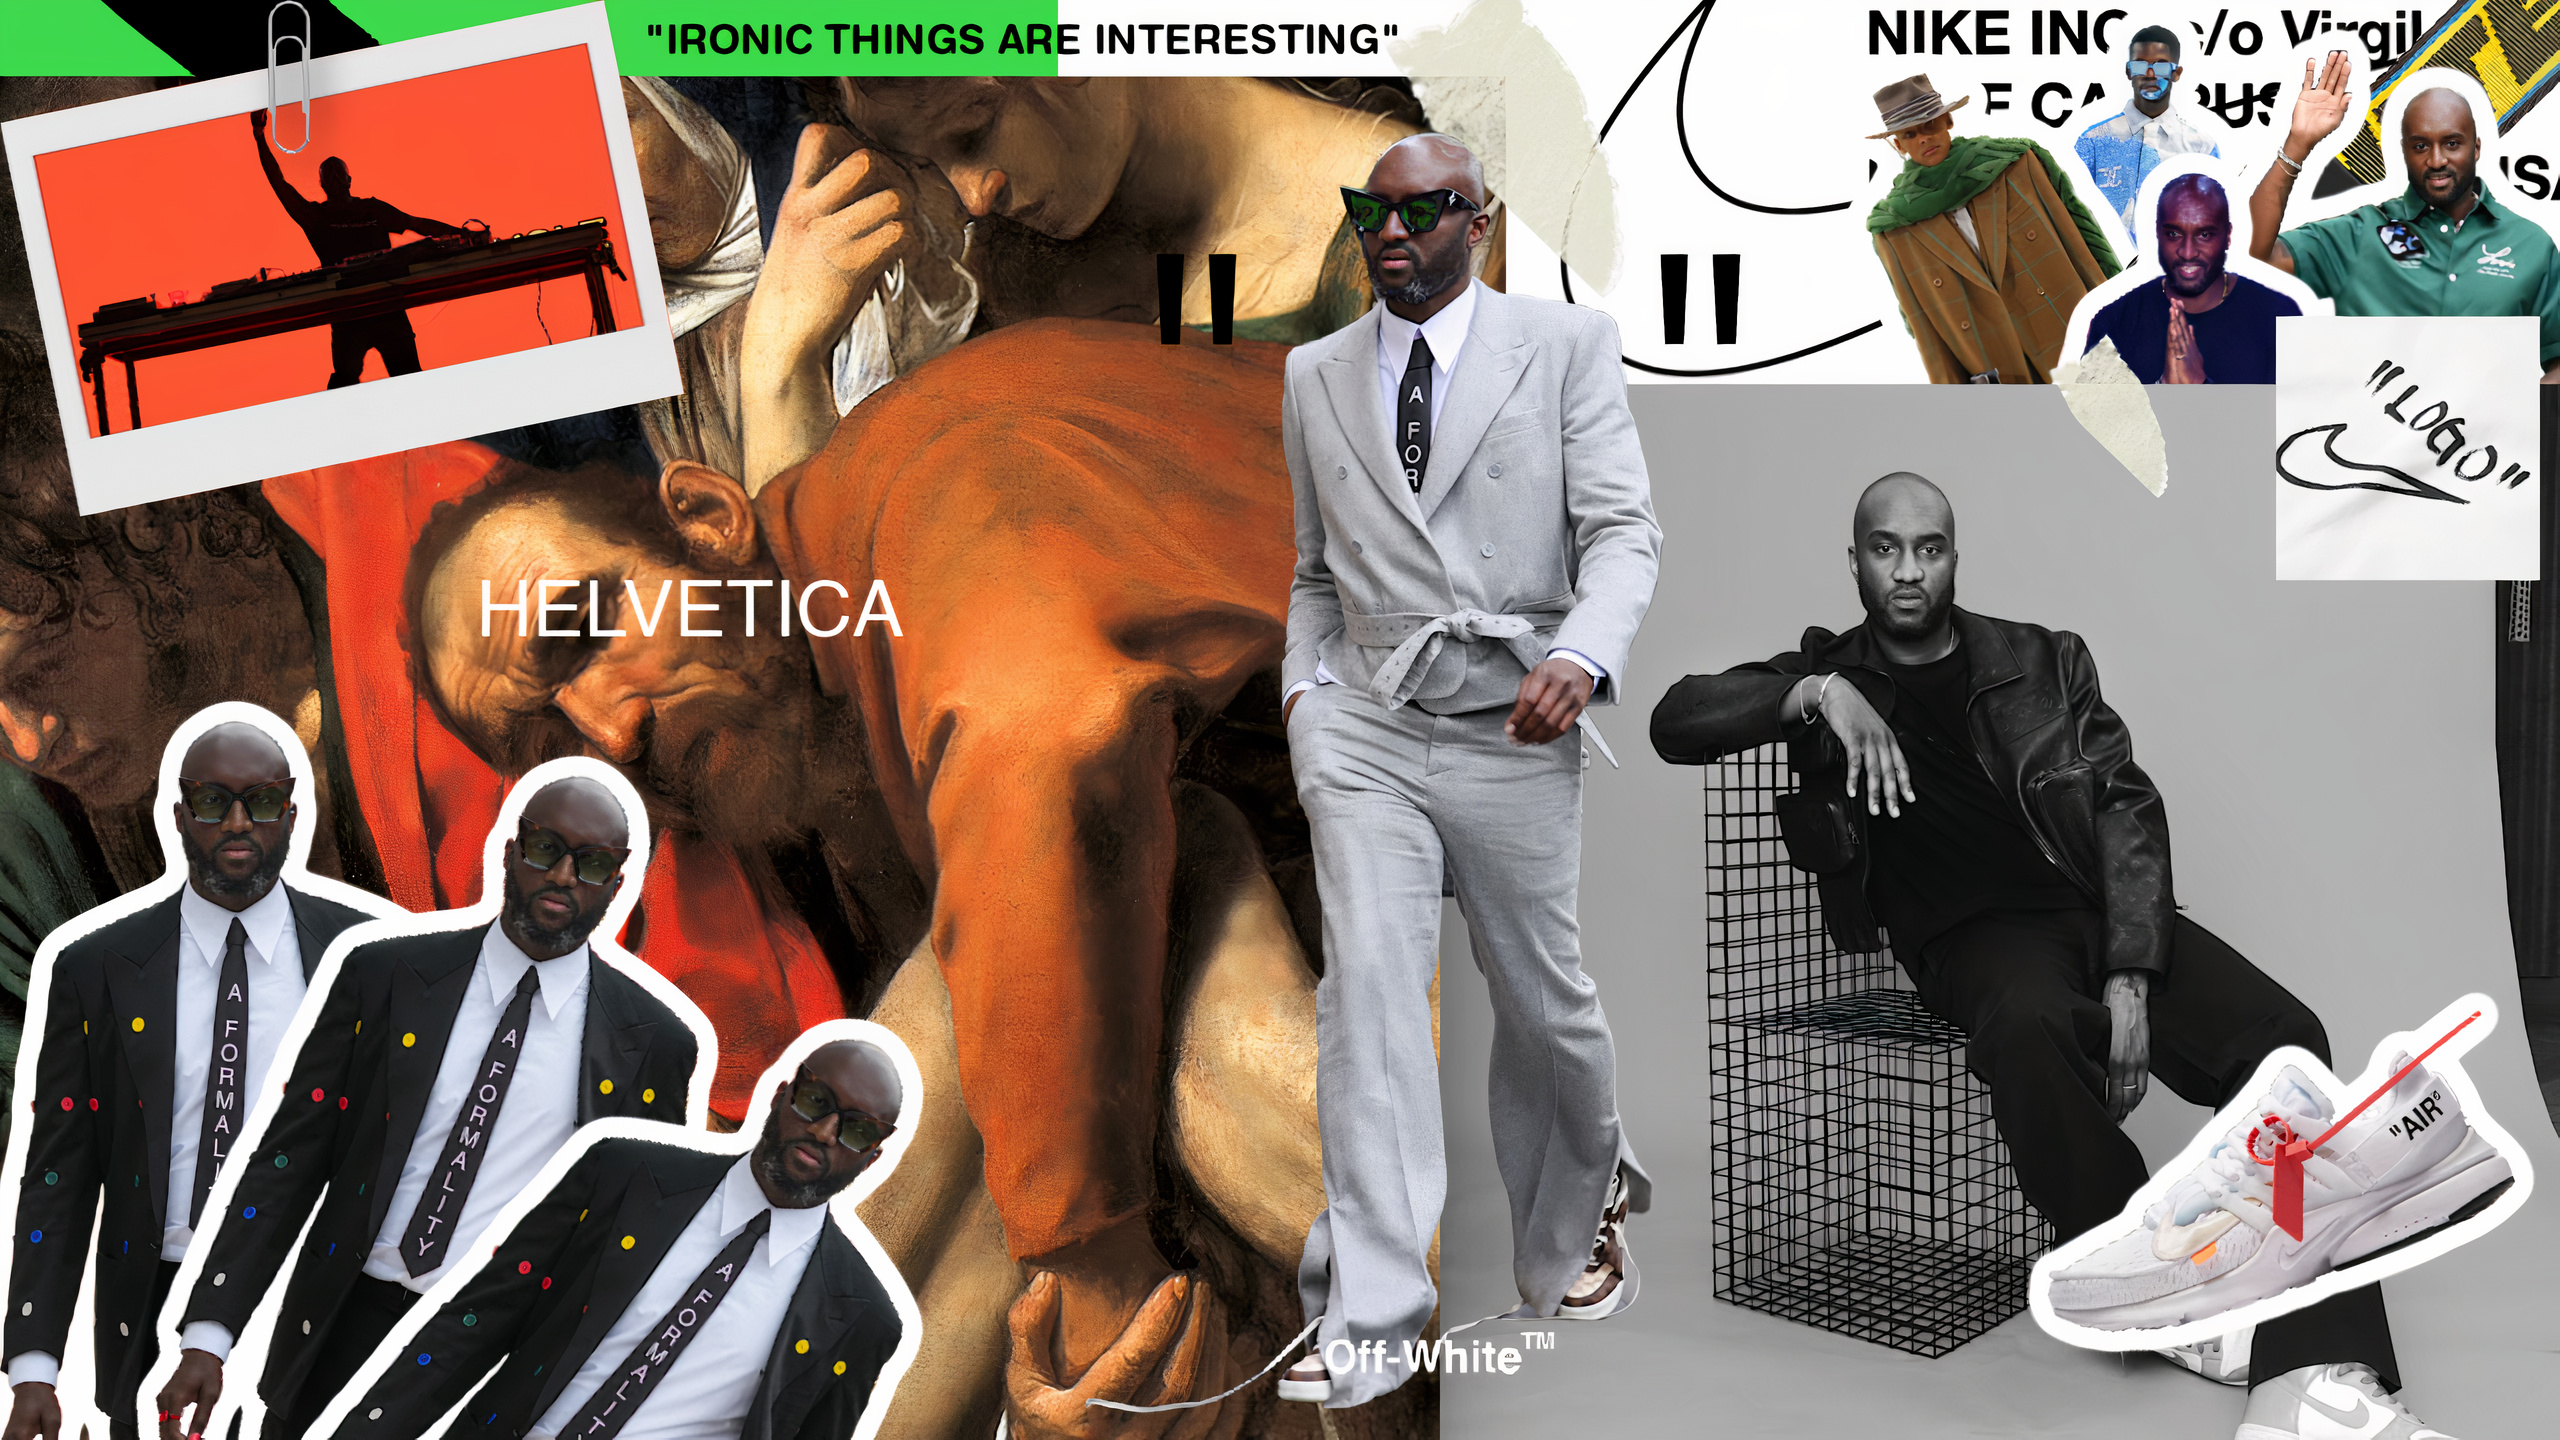 Did you know Virgil Abloh helped design these iconic album covers